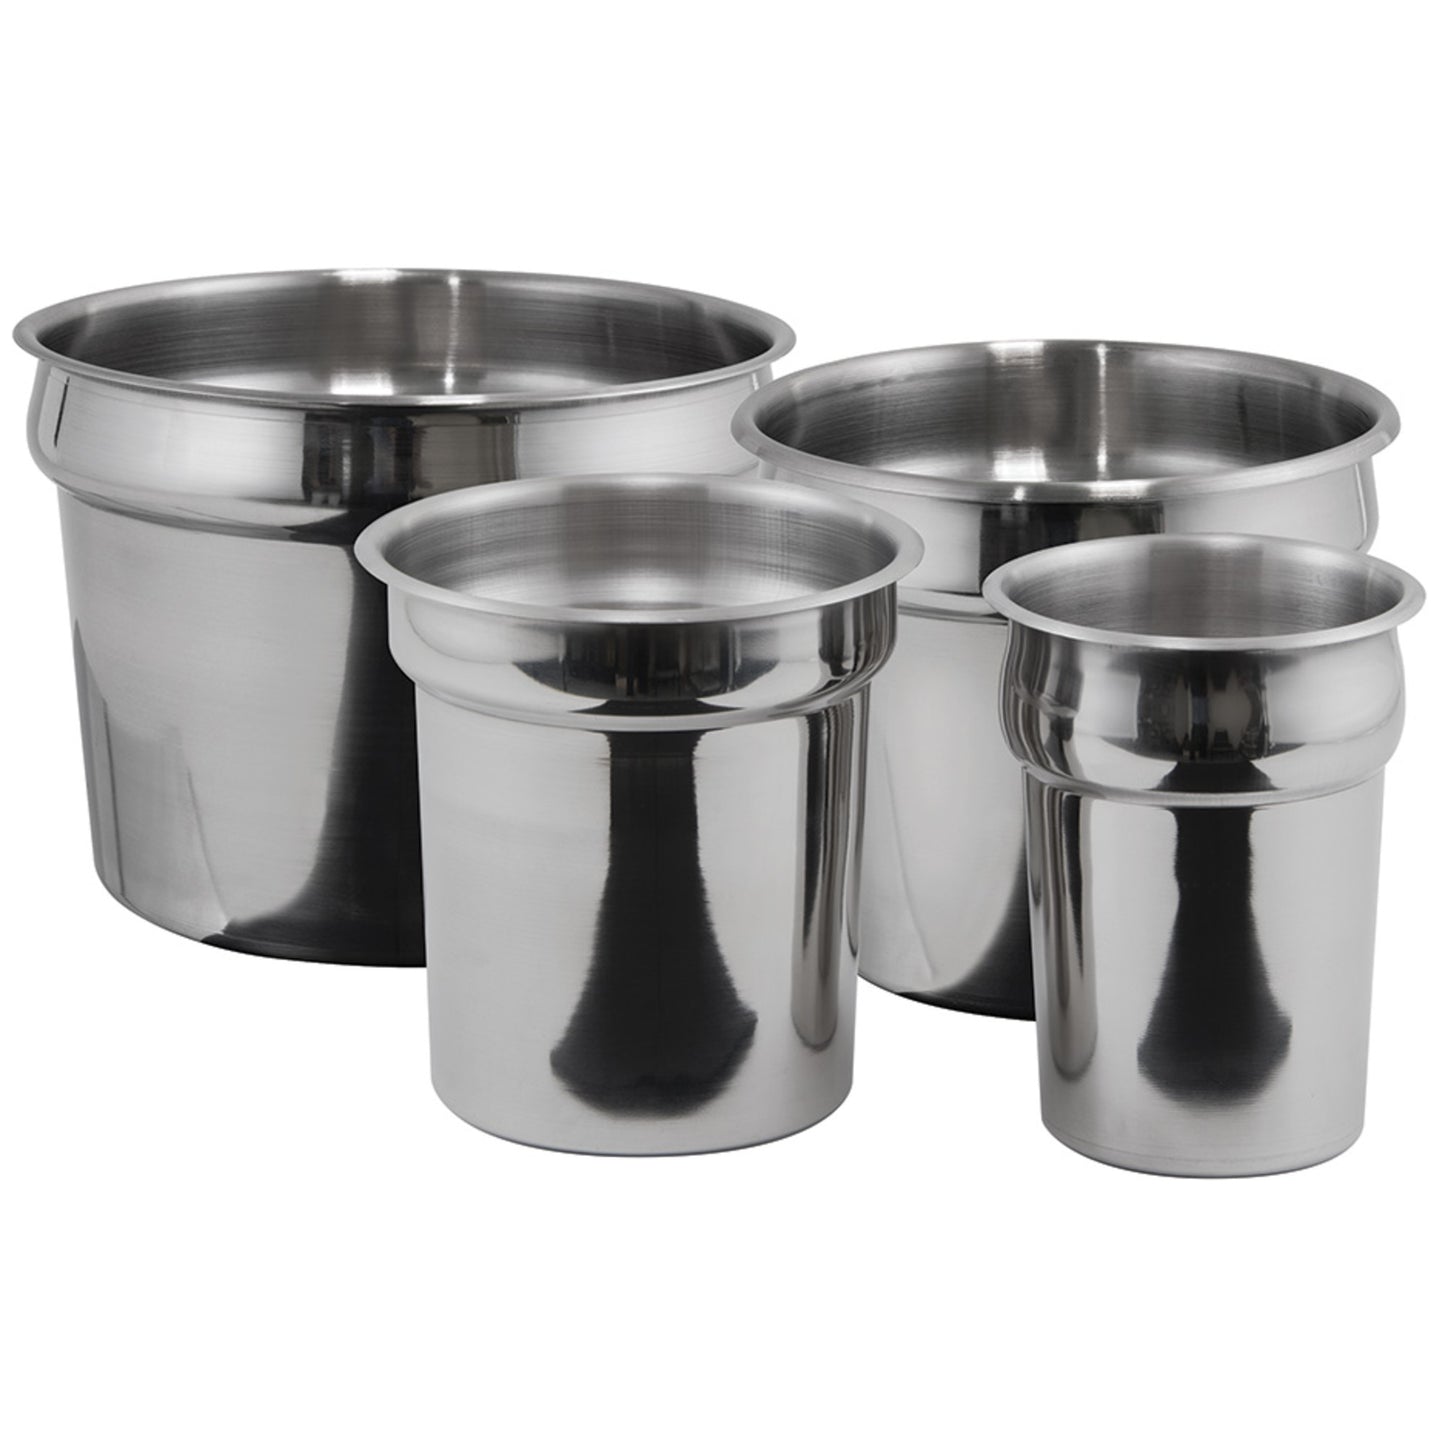 Stainless Steel Inset - 2-1/2 Quart